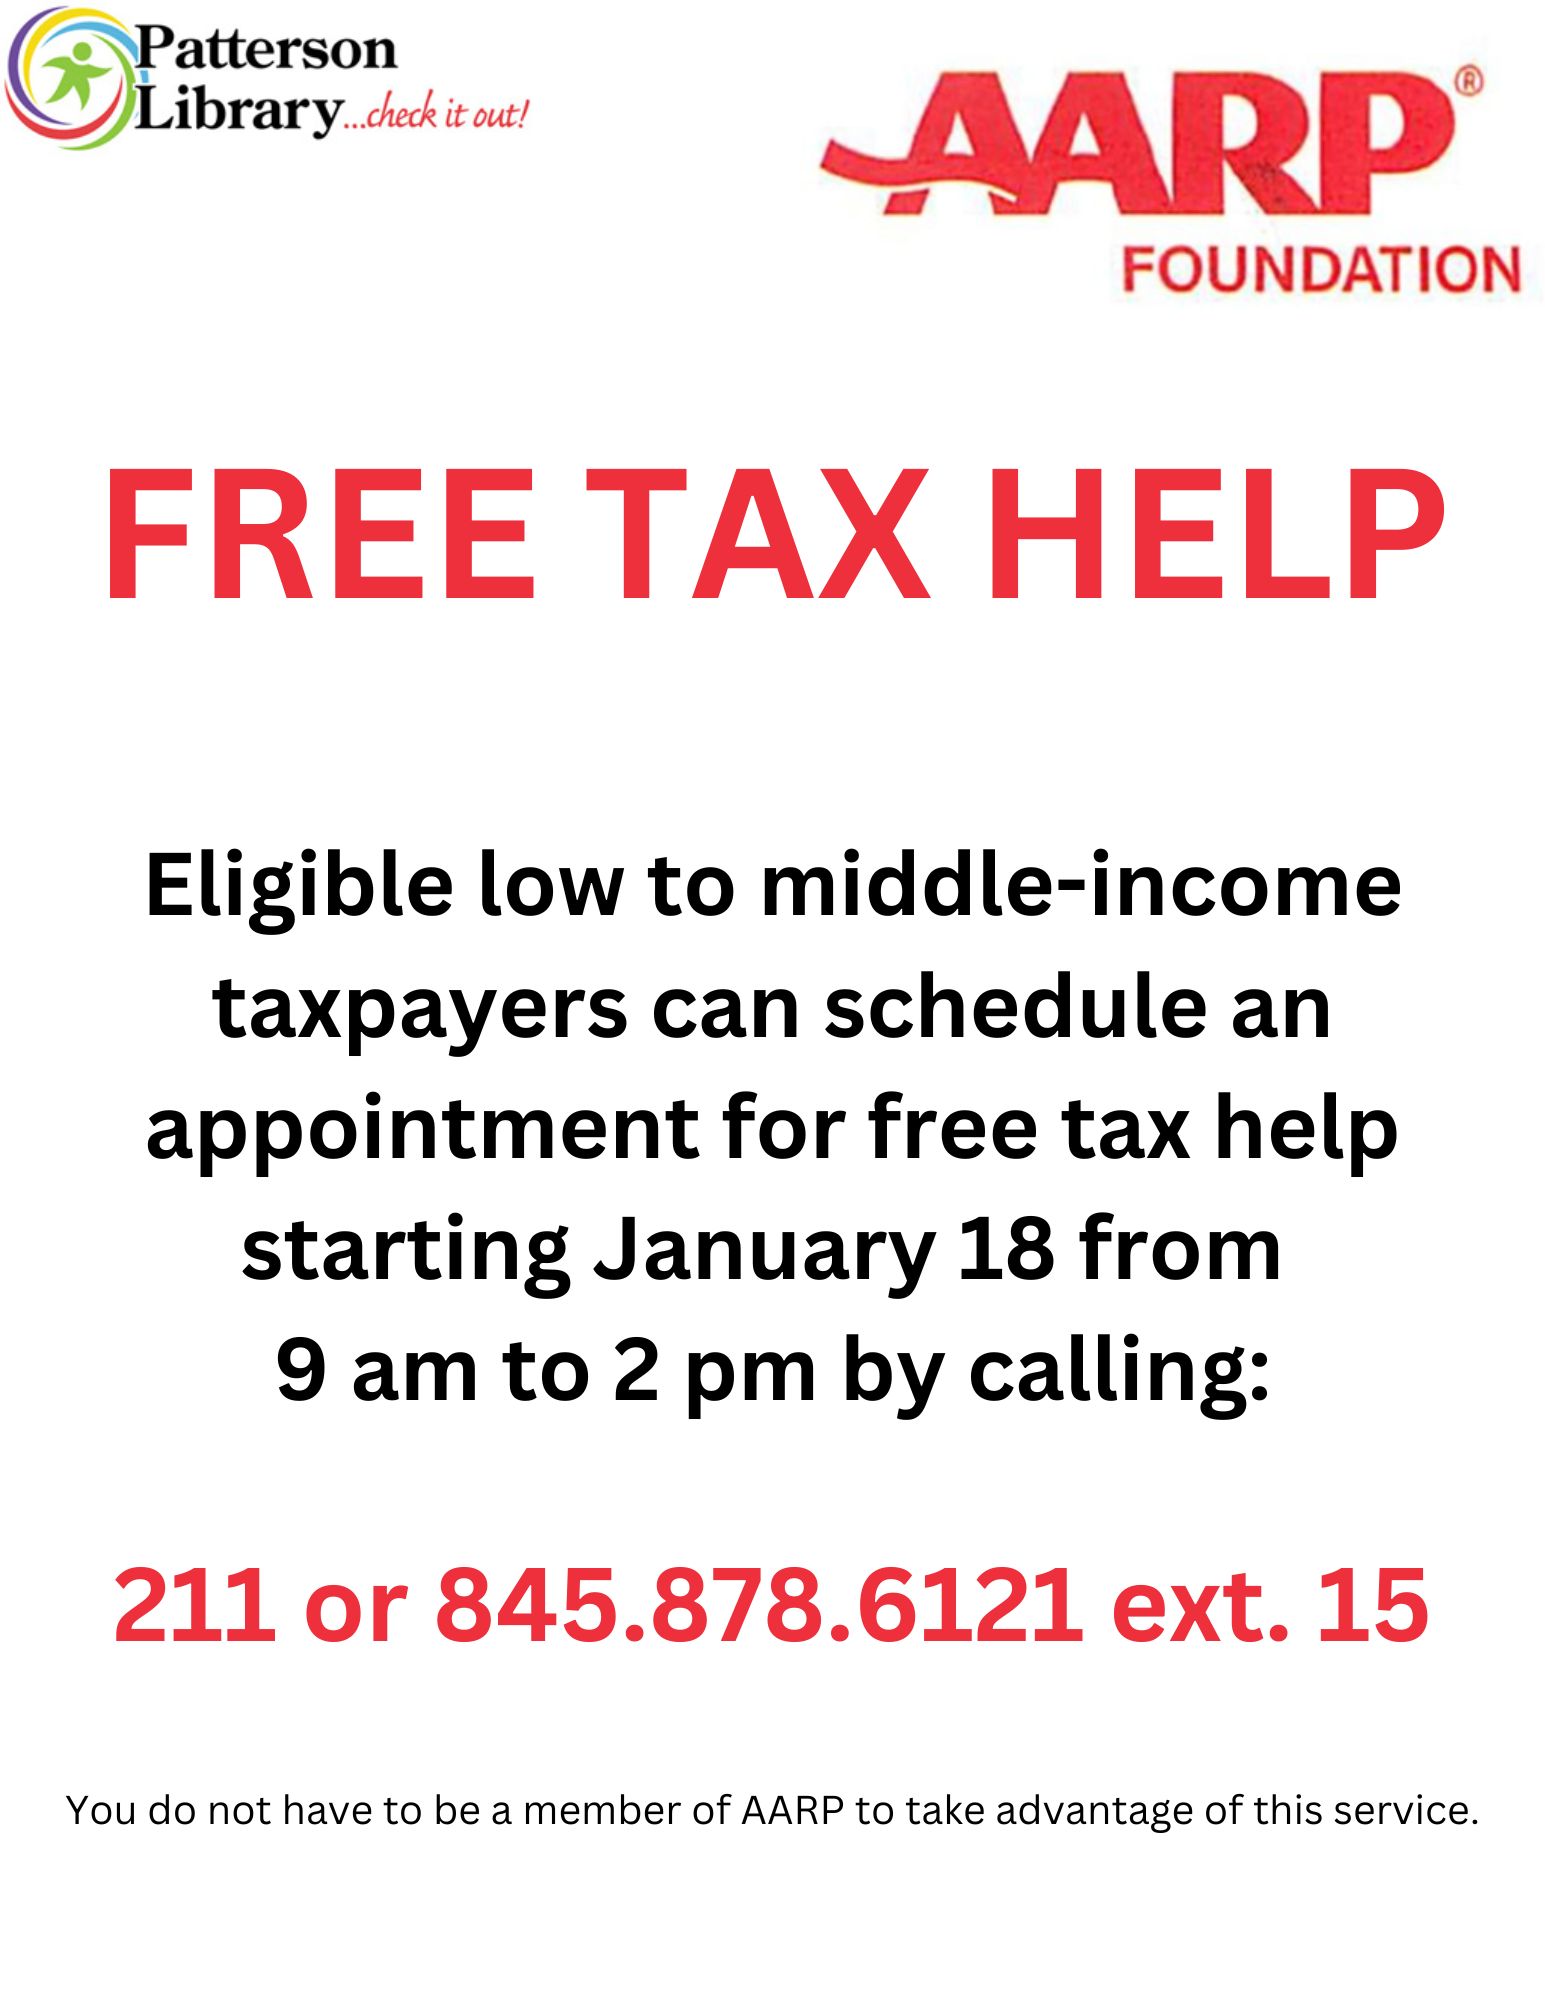 Eligible low to middle-income taxpayers can schedule an appointment for free tax help!